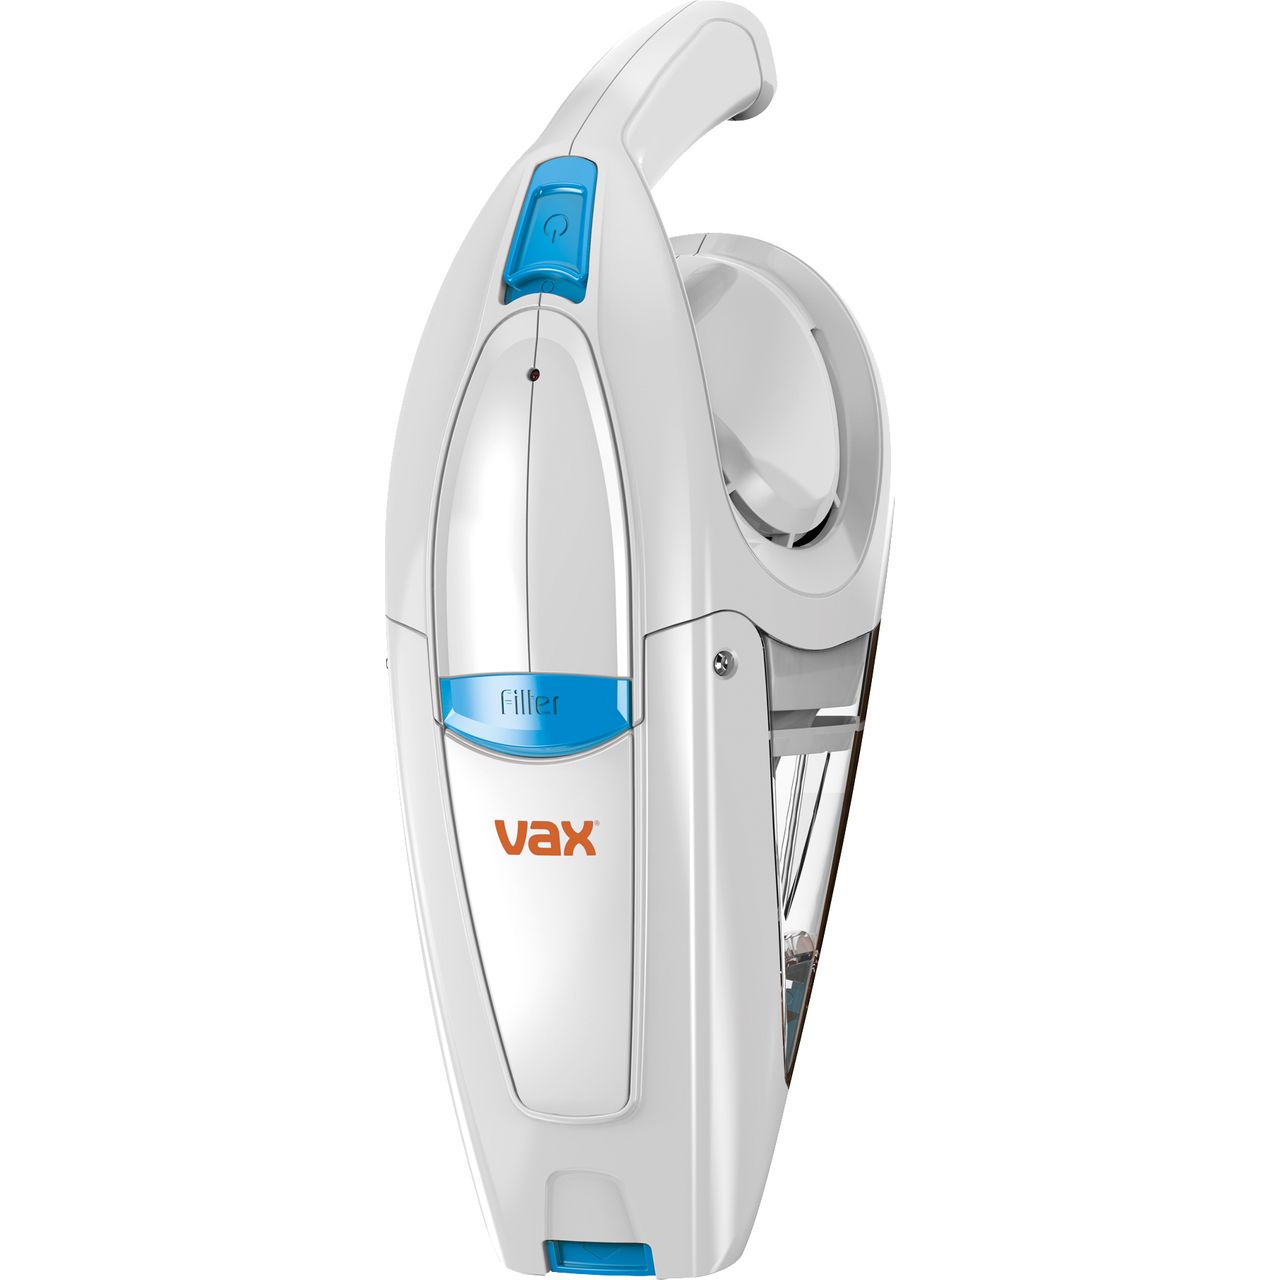 Vax Gator HCGRV1B1 Handheld Vacuum Cleaner with up to 15 Minutes Run Time Review